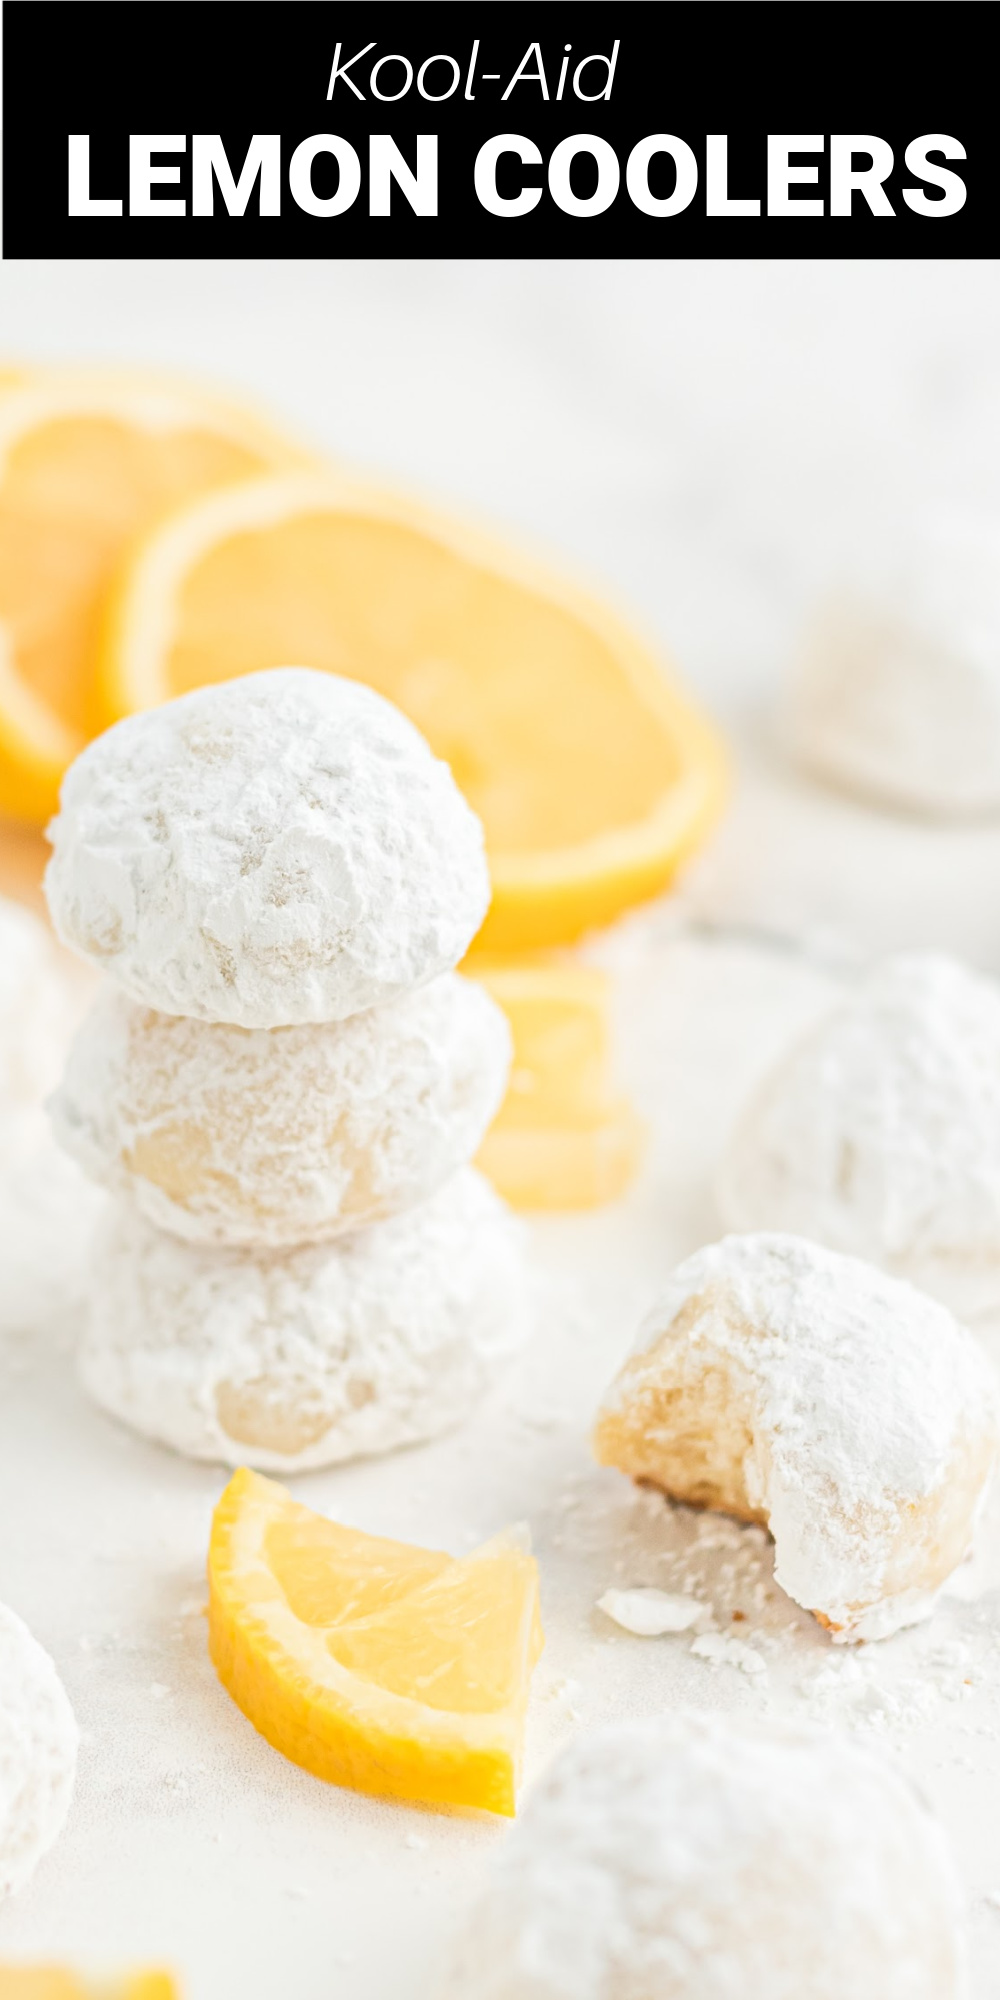 These Lemon Coolers are delightful lemon-flavored cookies that are small, round, and covered with powdered sugar. They are perfectly bite-sized which are great for a snack, tea party, or special treat. Try them this summer for a fresh and zesty cookie the whole family will love!